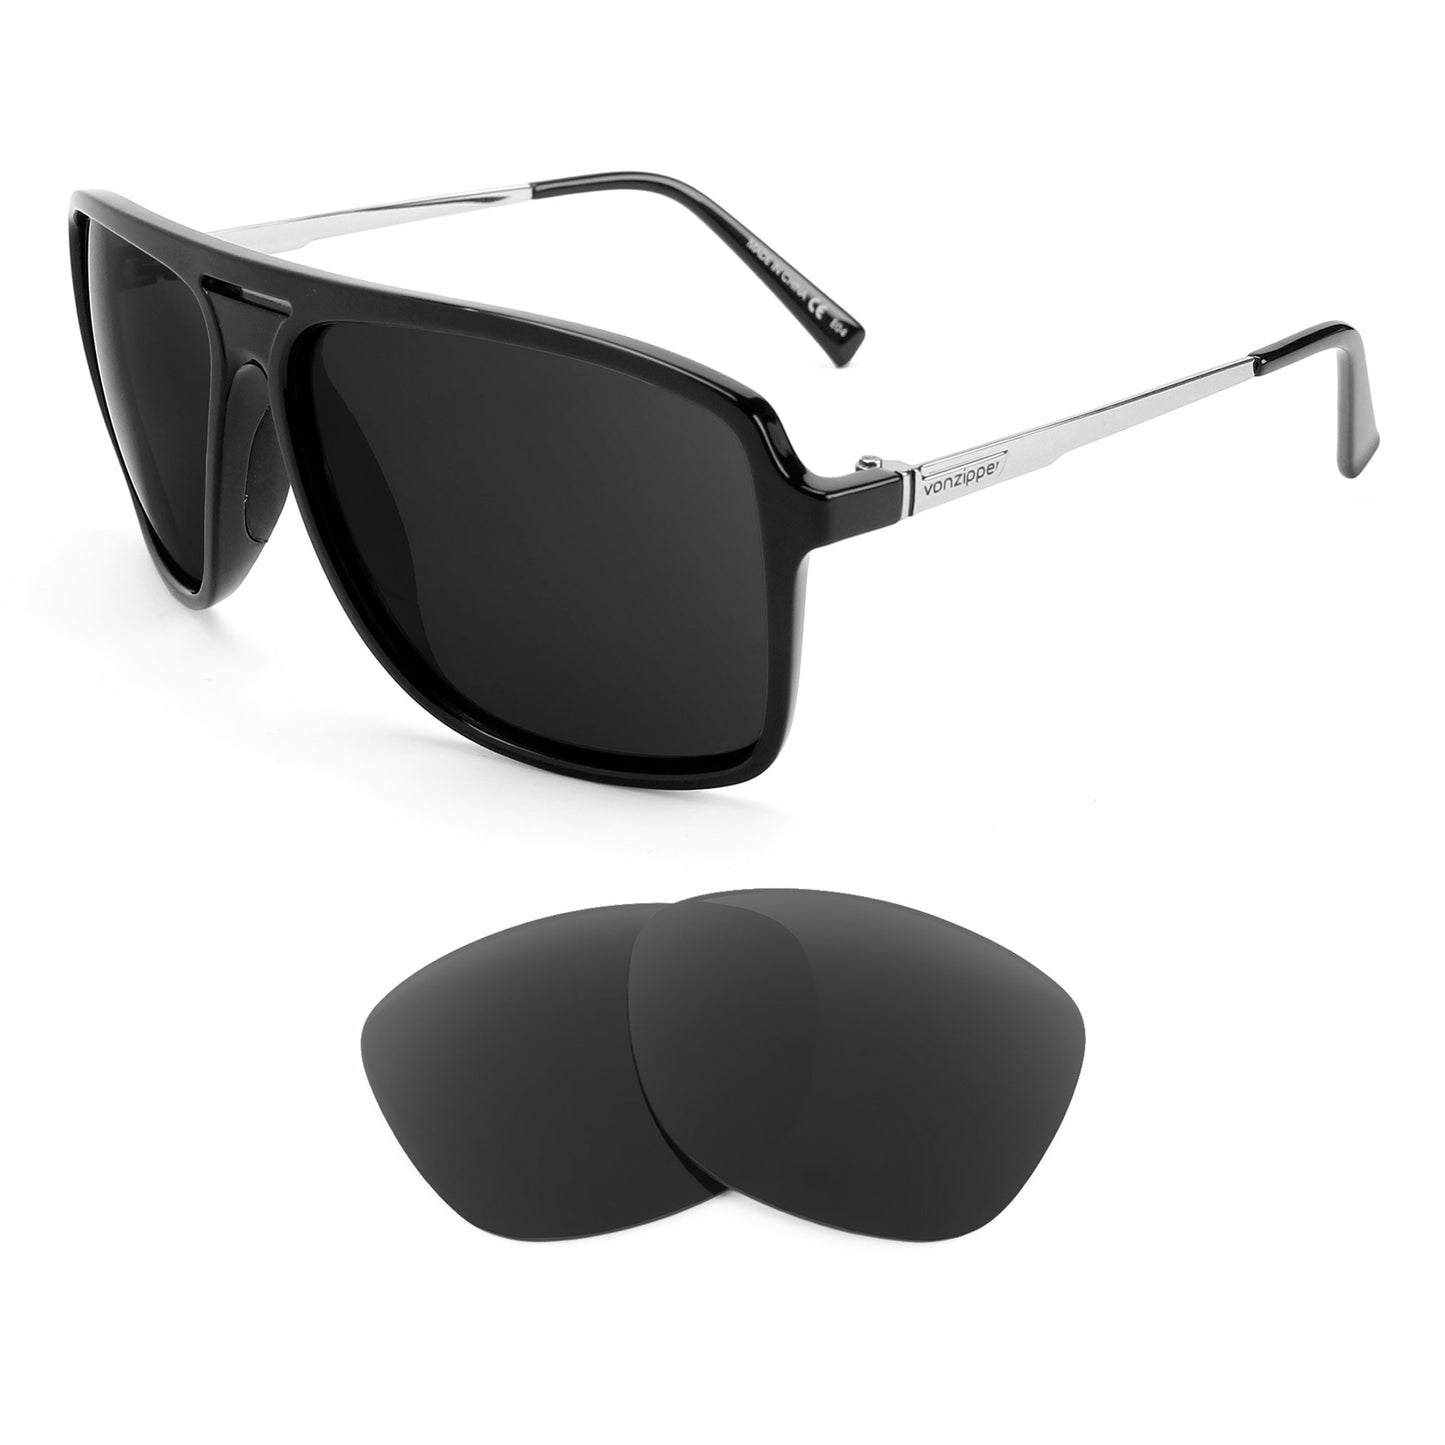 VonZipper Hotwax sunglasses with replacement lenses